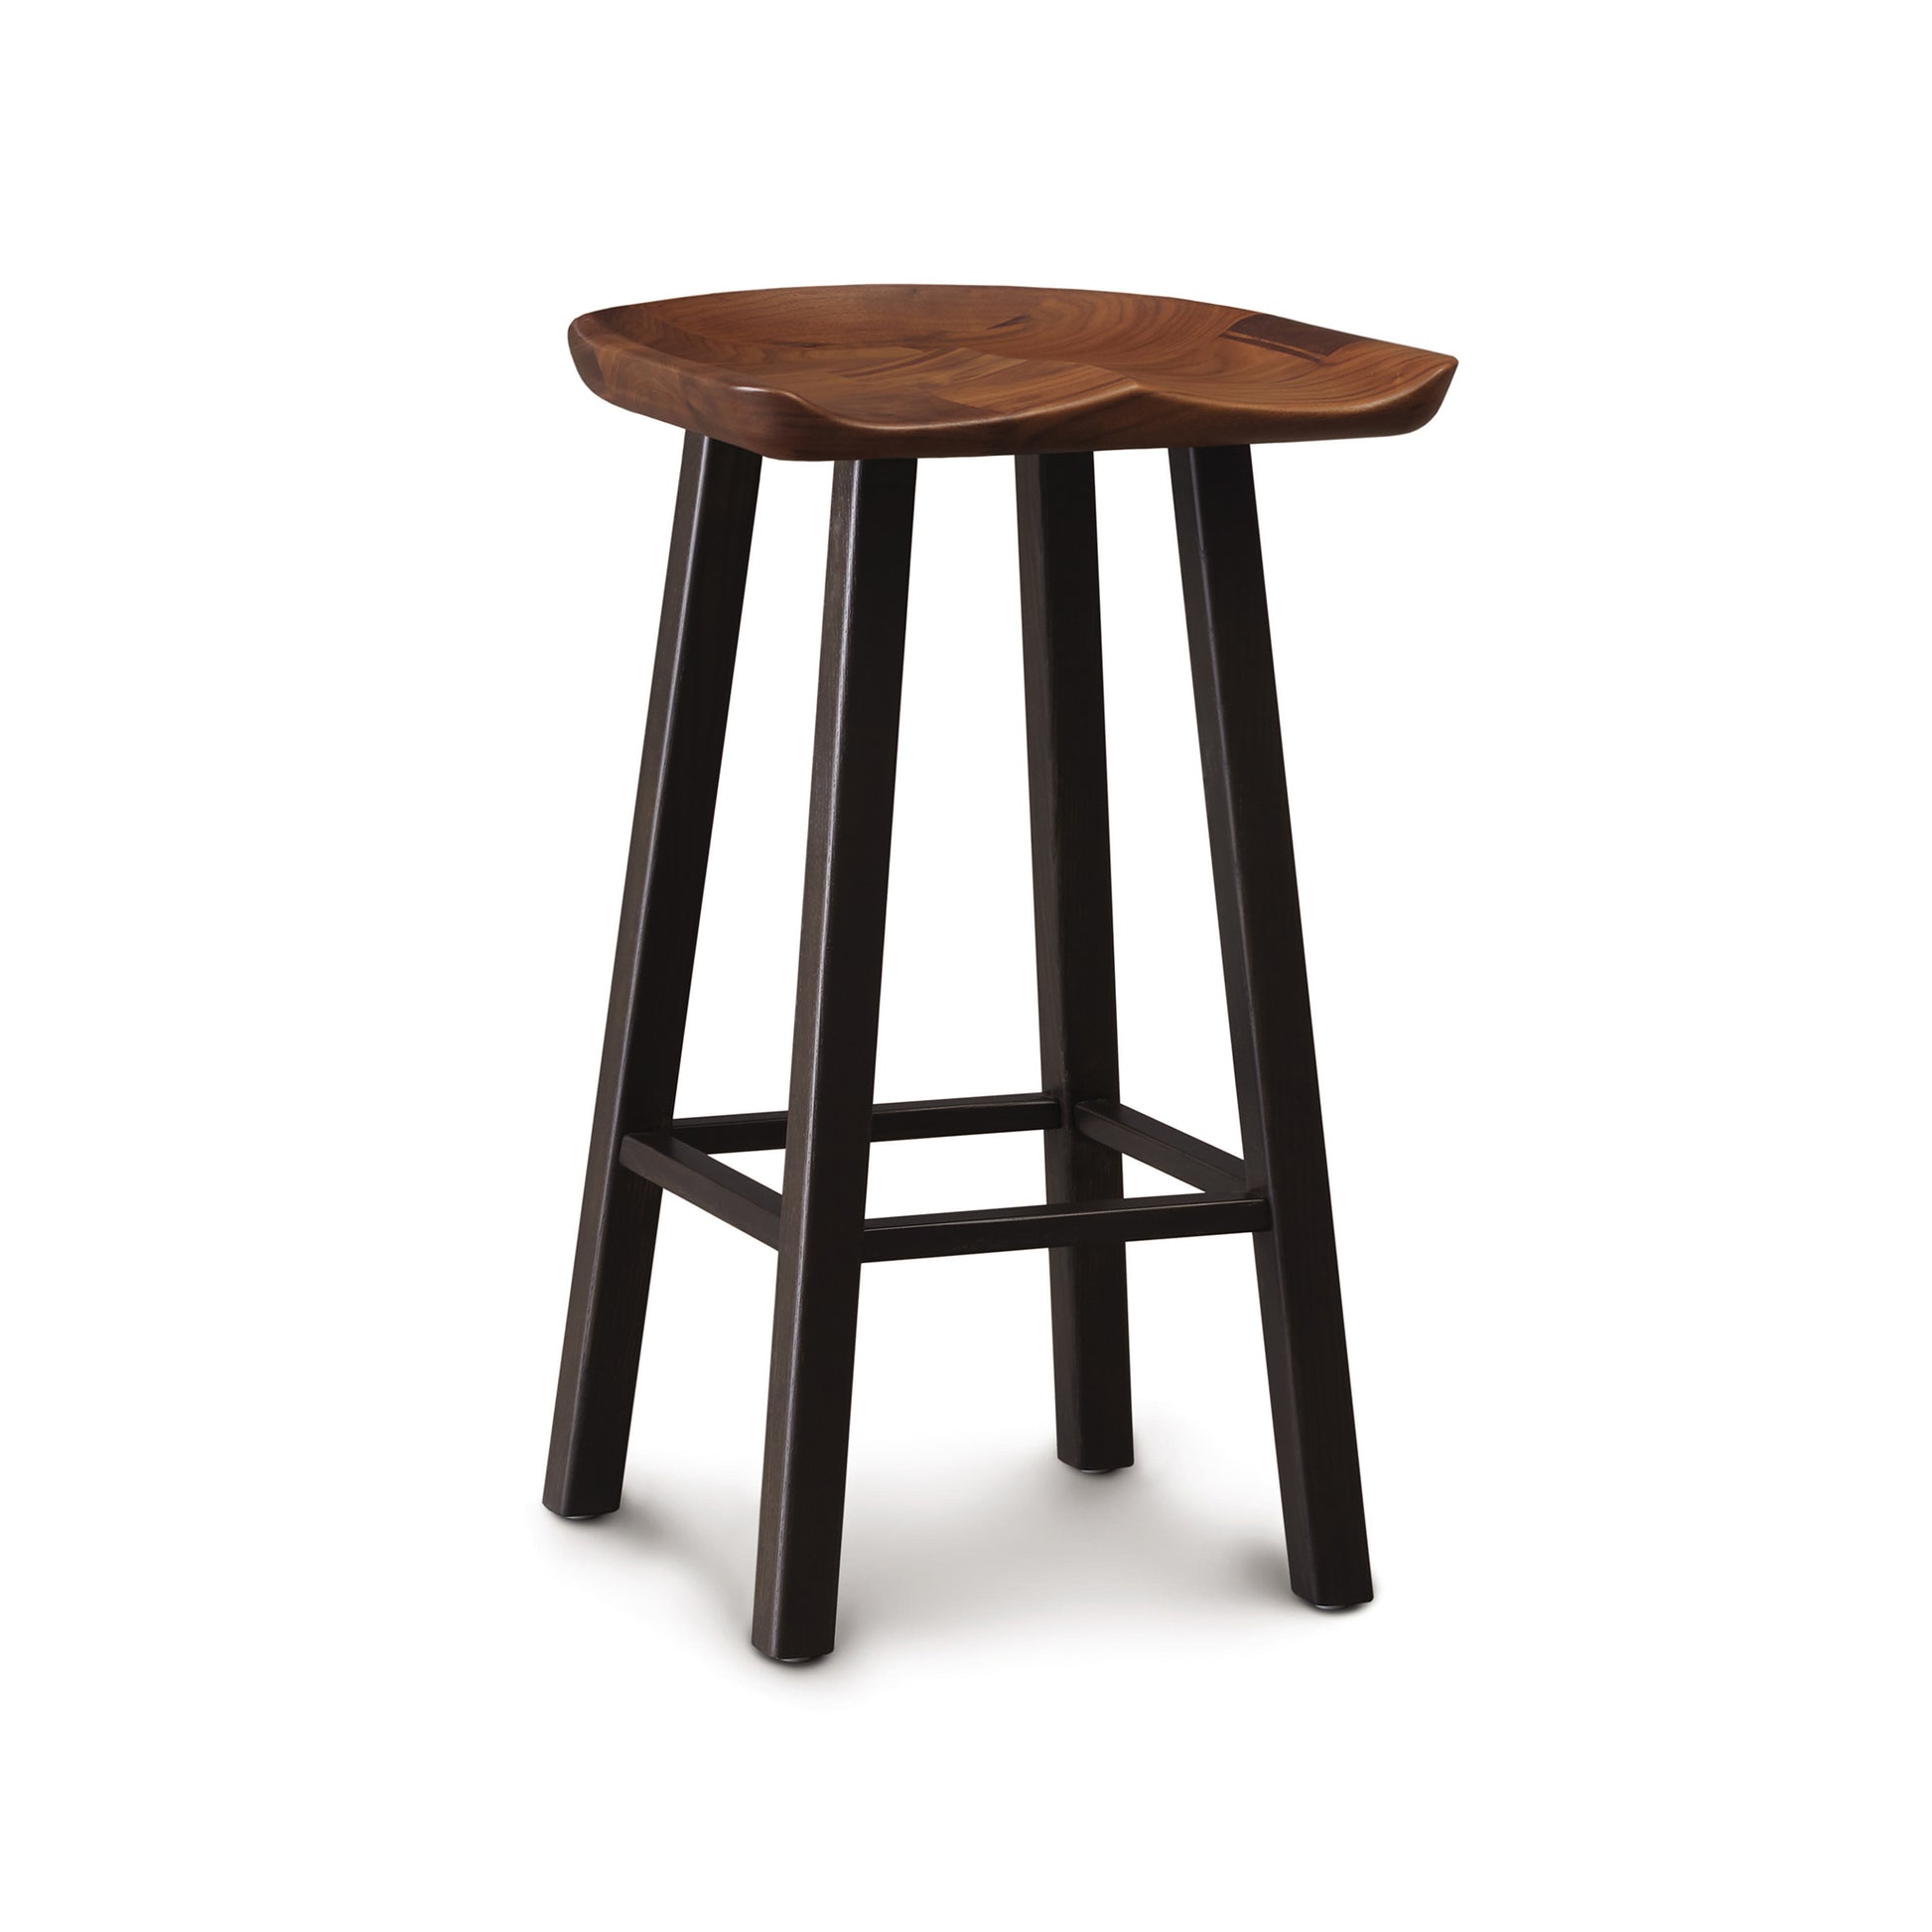 A Modern Farmhouse Tractor Counter Stool by Copeland Furniture with a dark wooden seat and black legs on a white background.